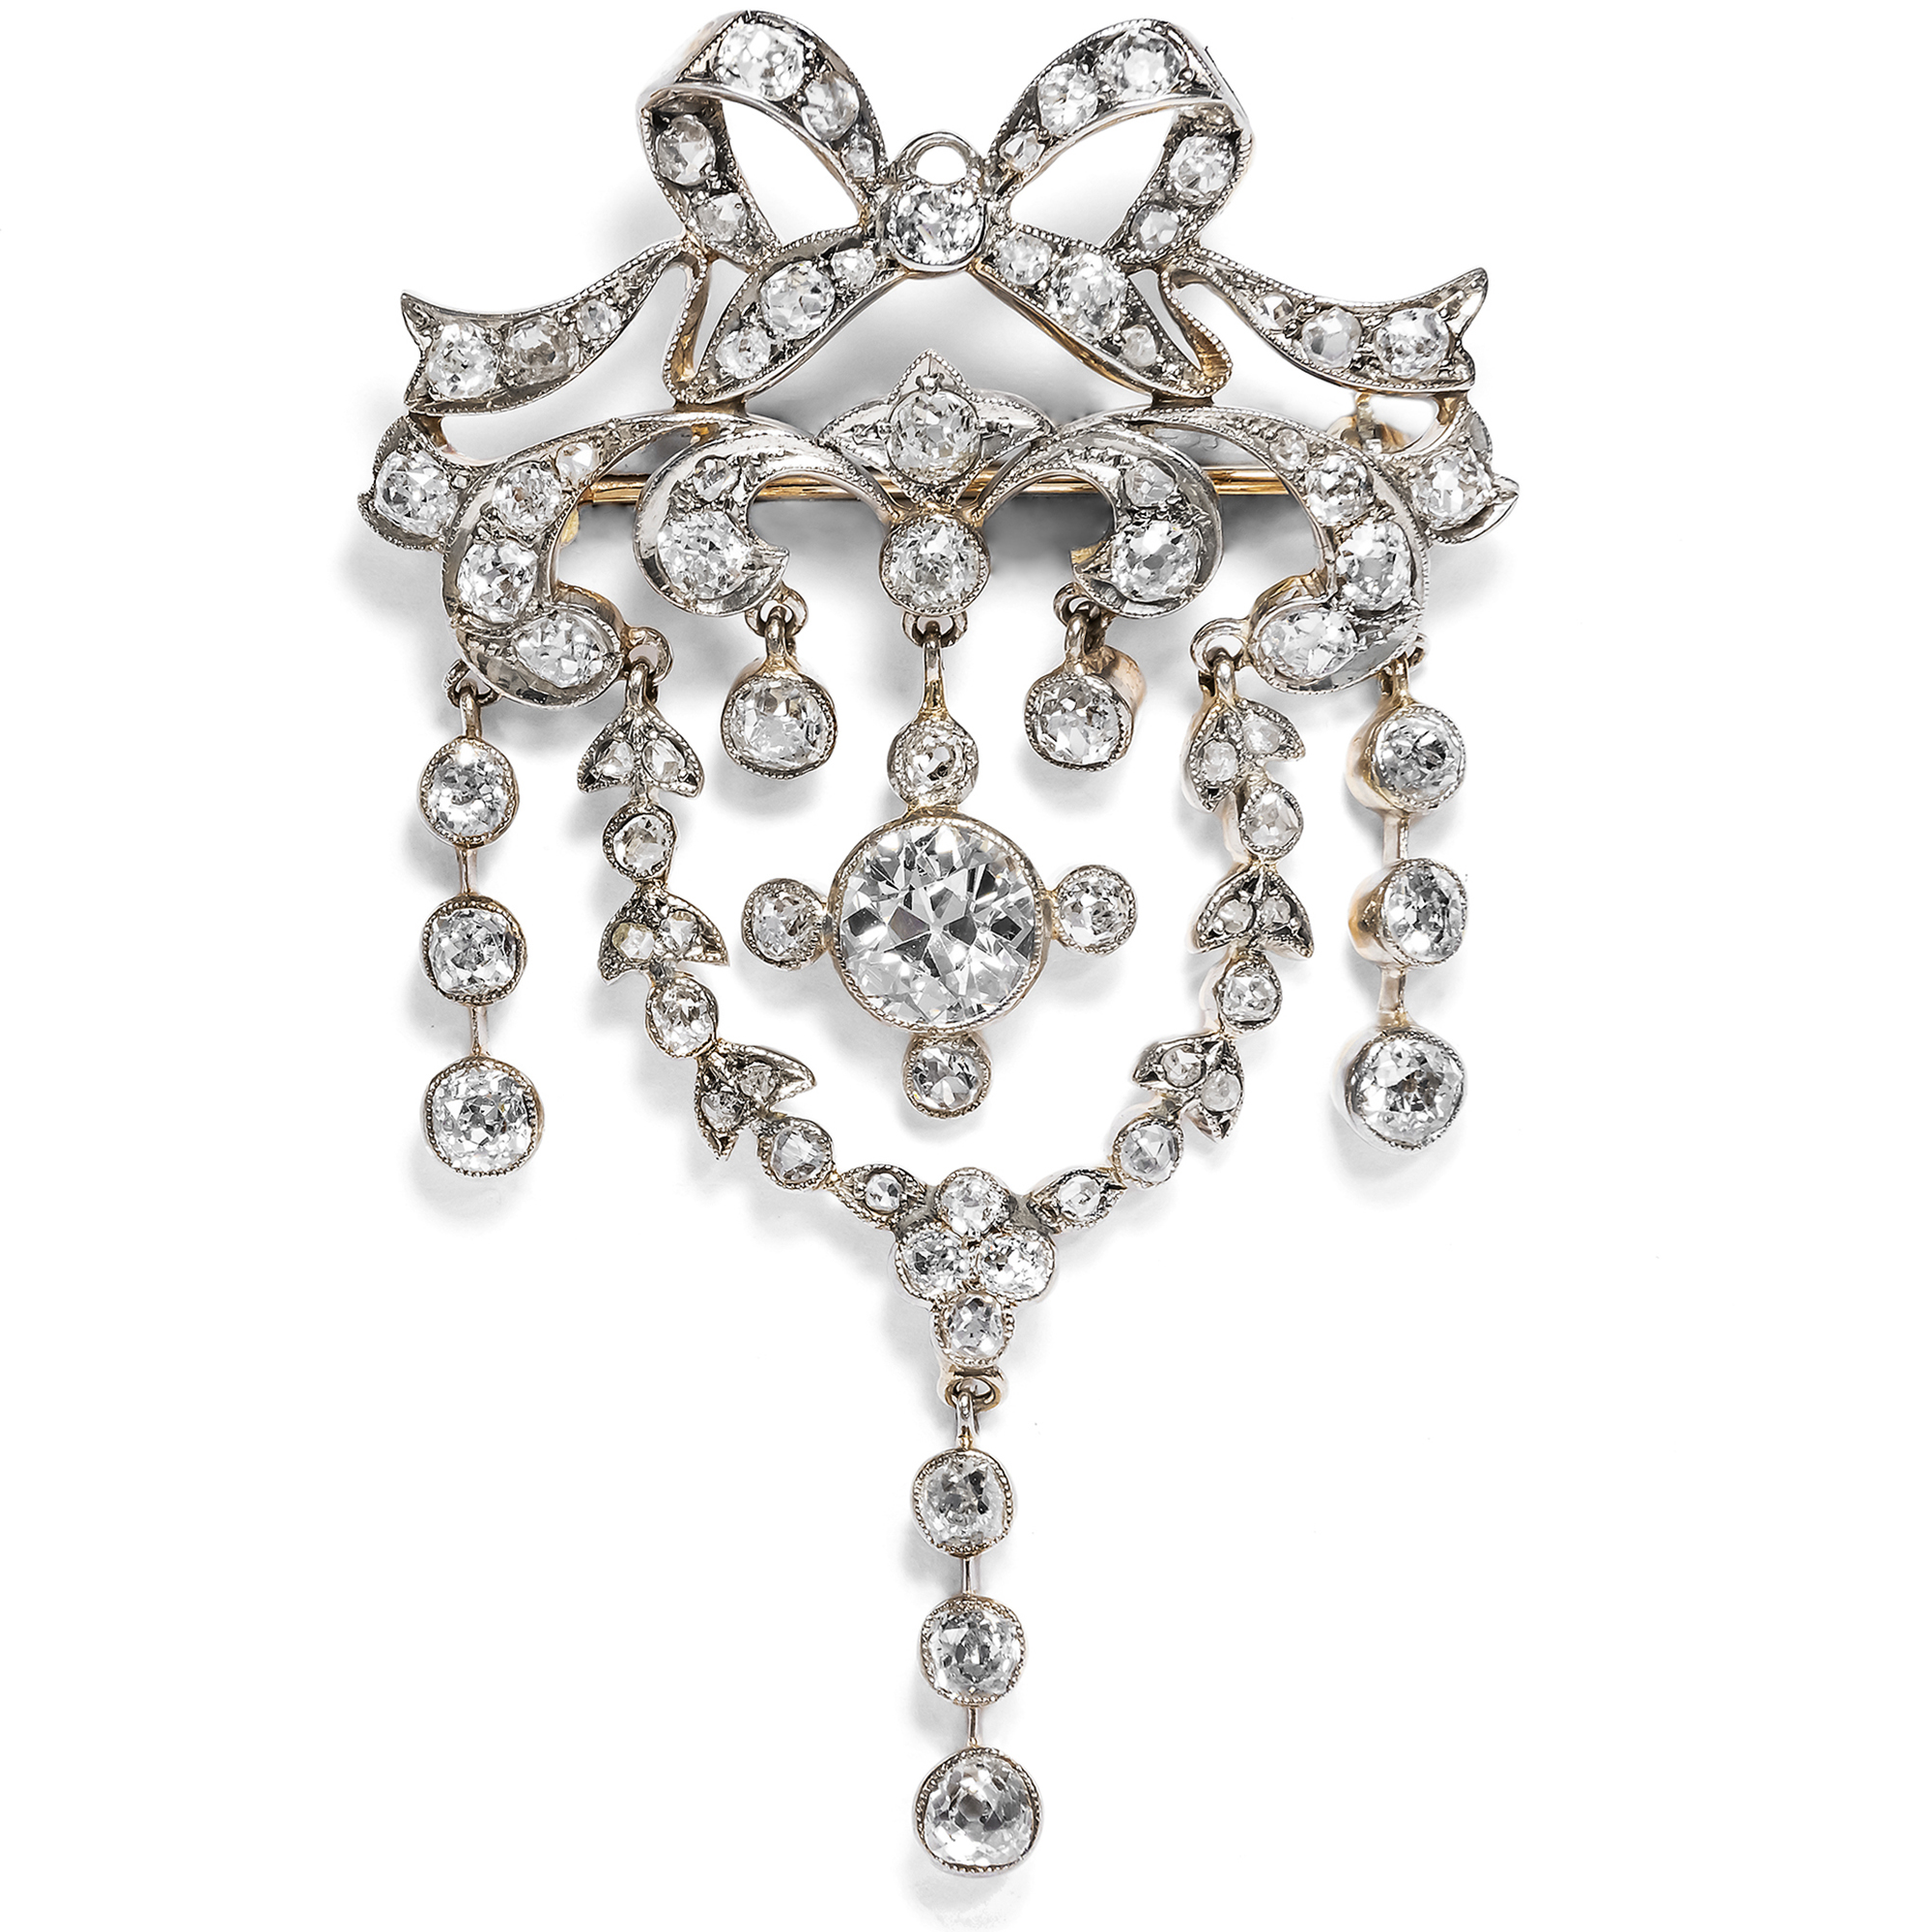 Magnificent brooch with 6.06 ct old-cut diamonds in silver on gold, circa 1900